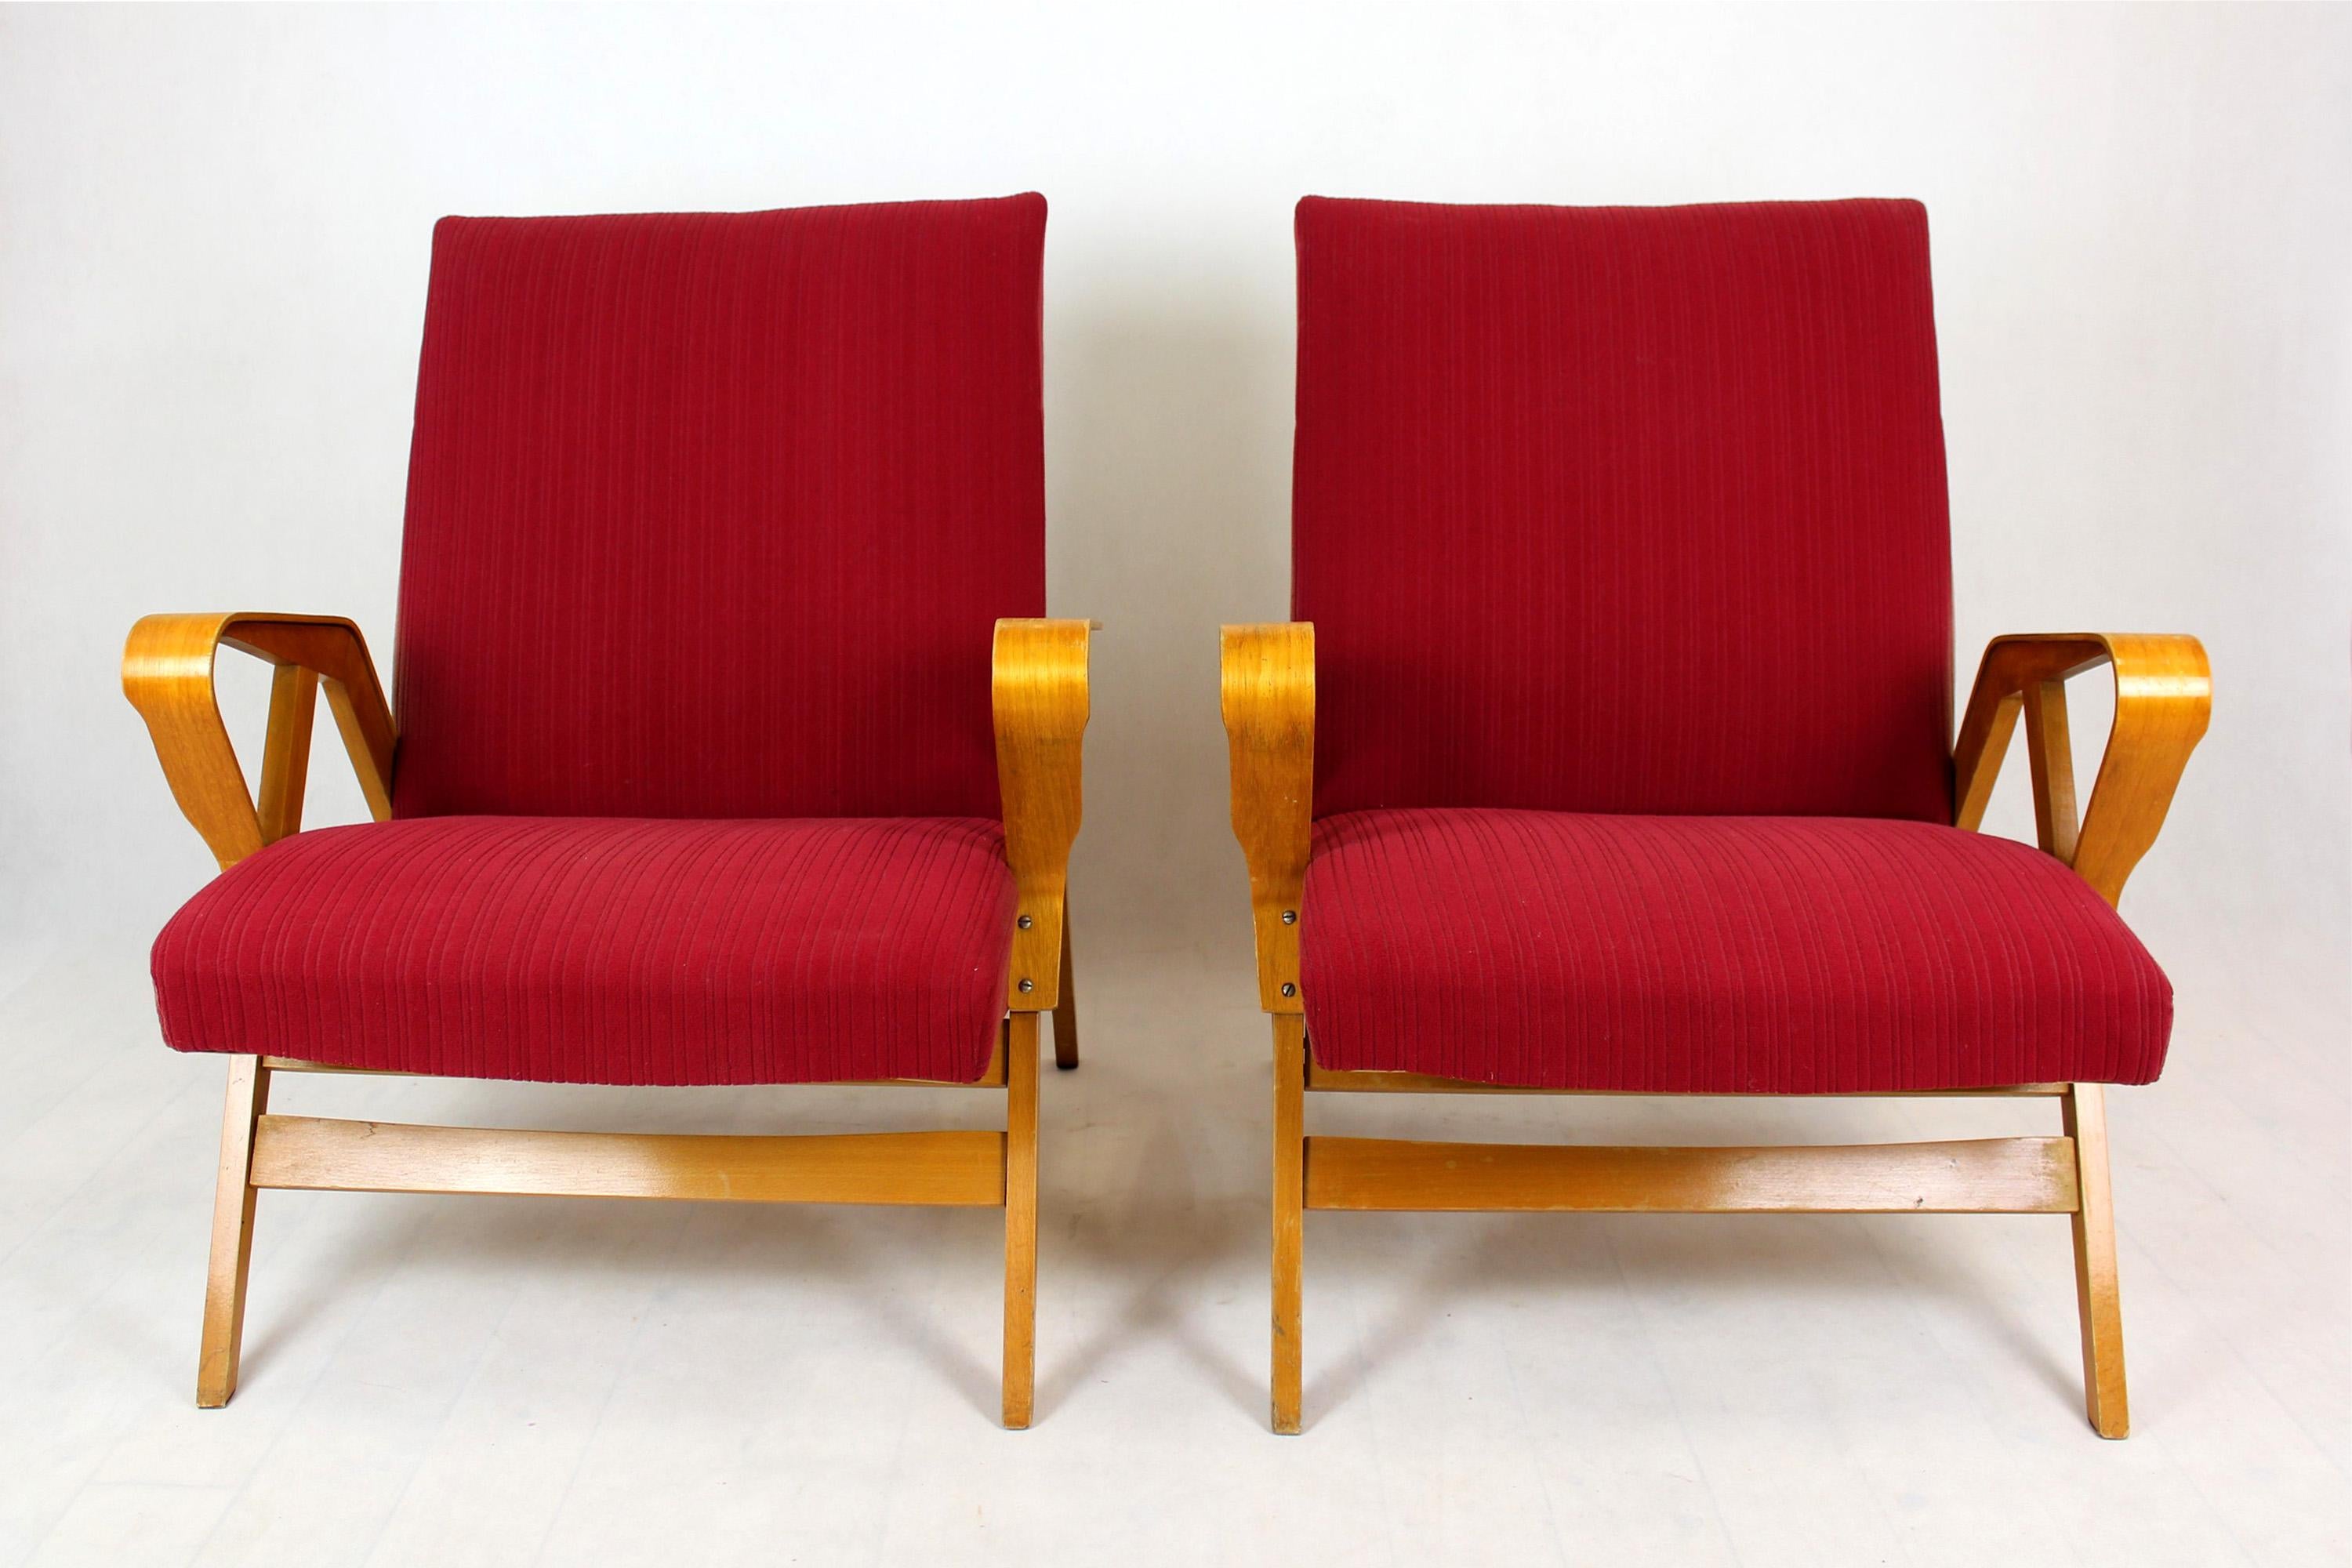 Pair of vintage armchairs, produced in the 1960s by Tatra in former Czechoslovakia.